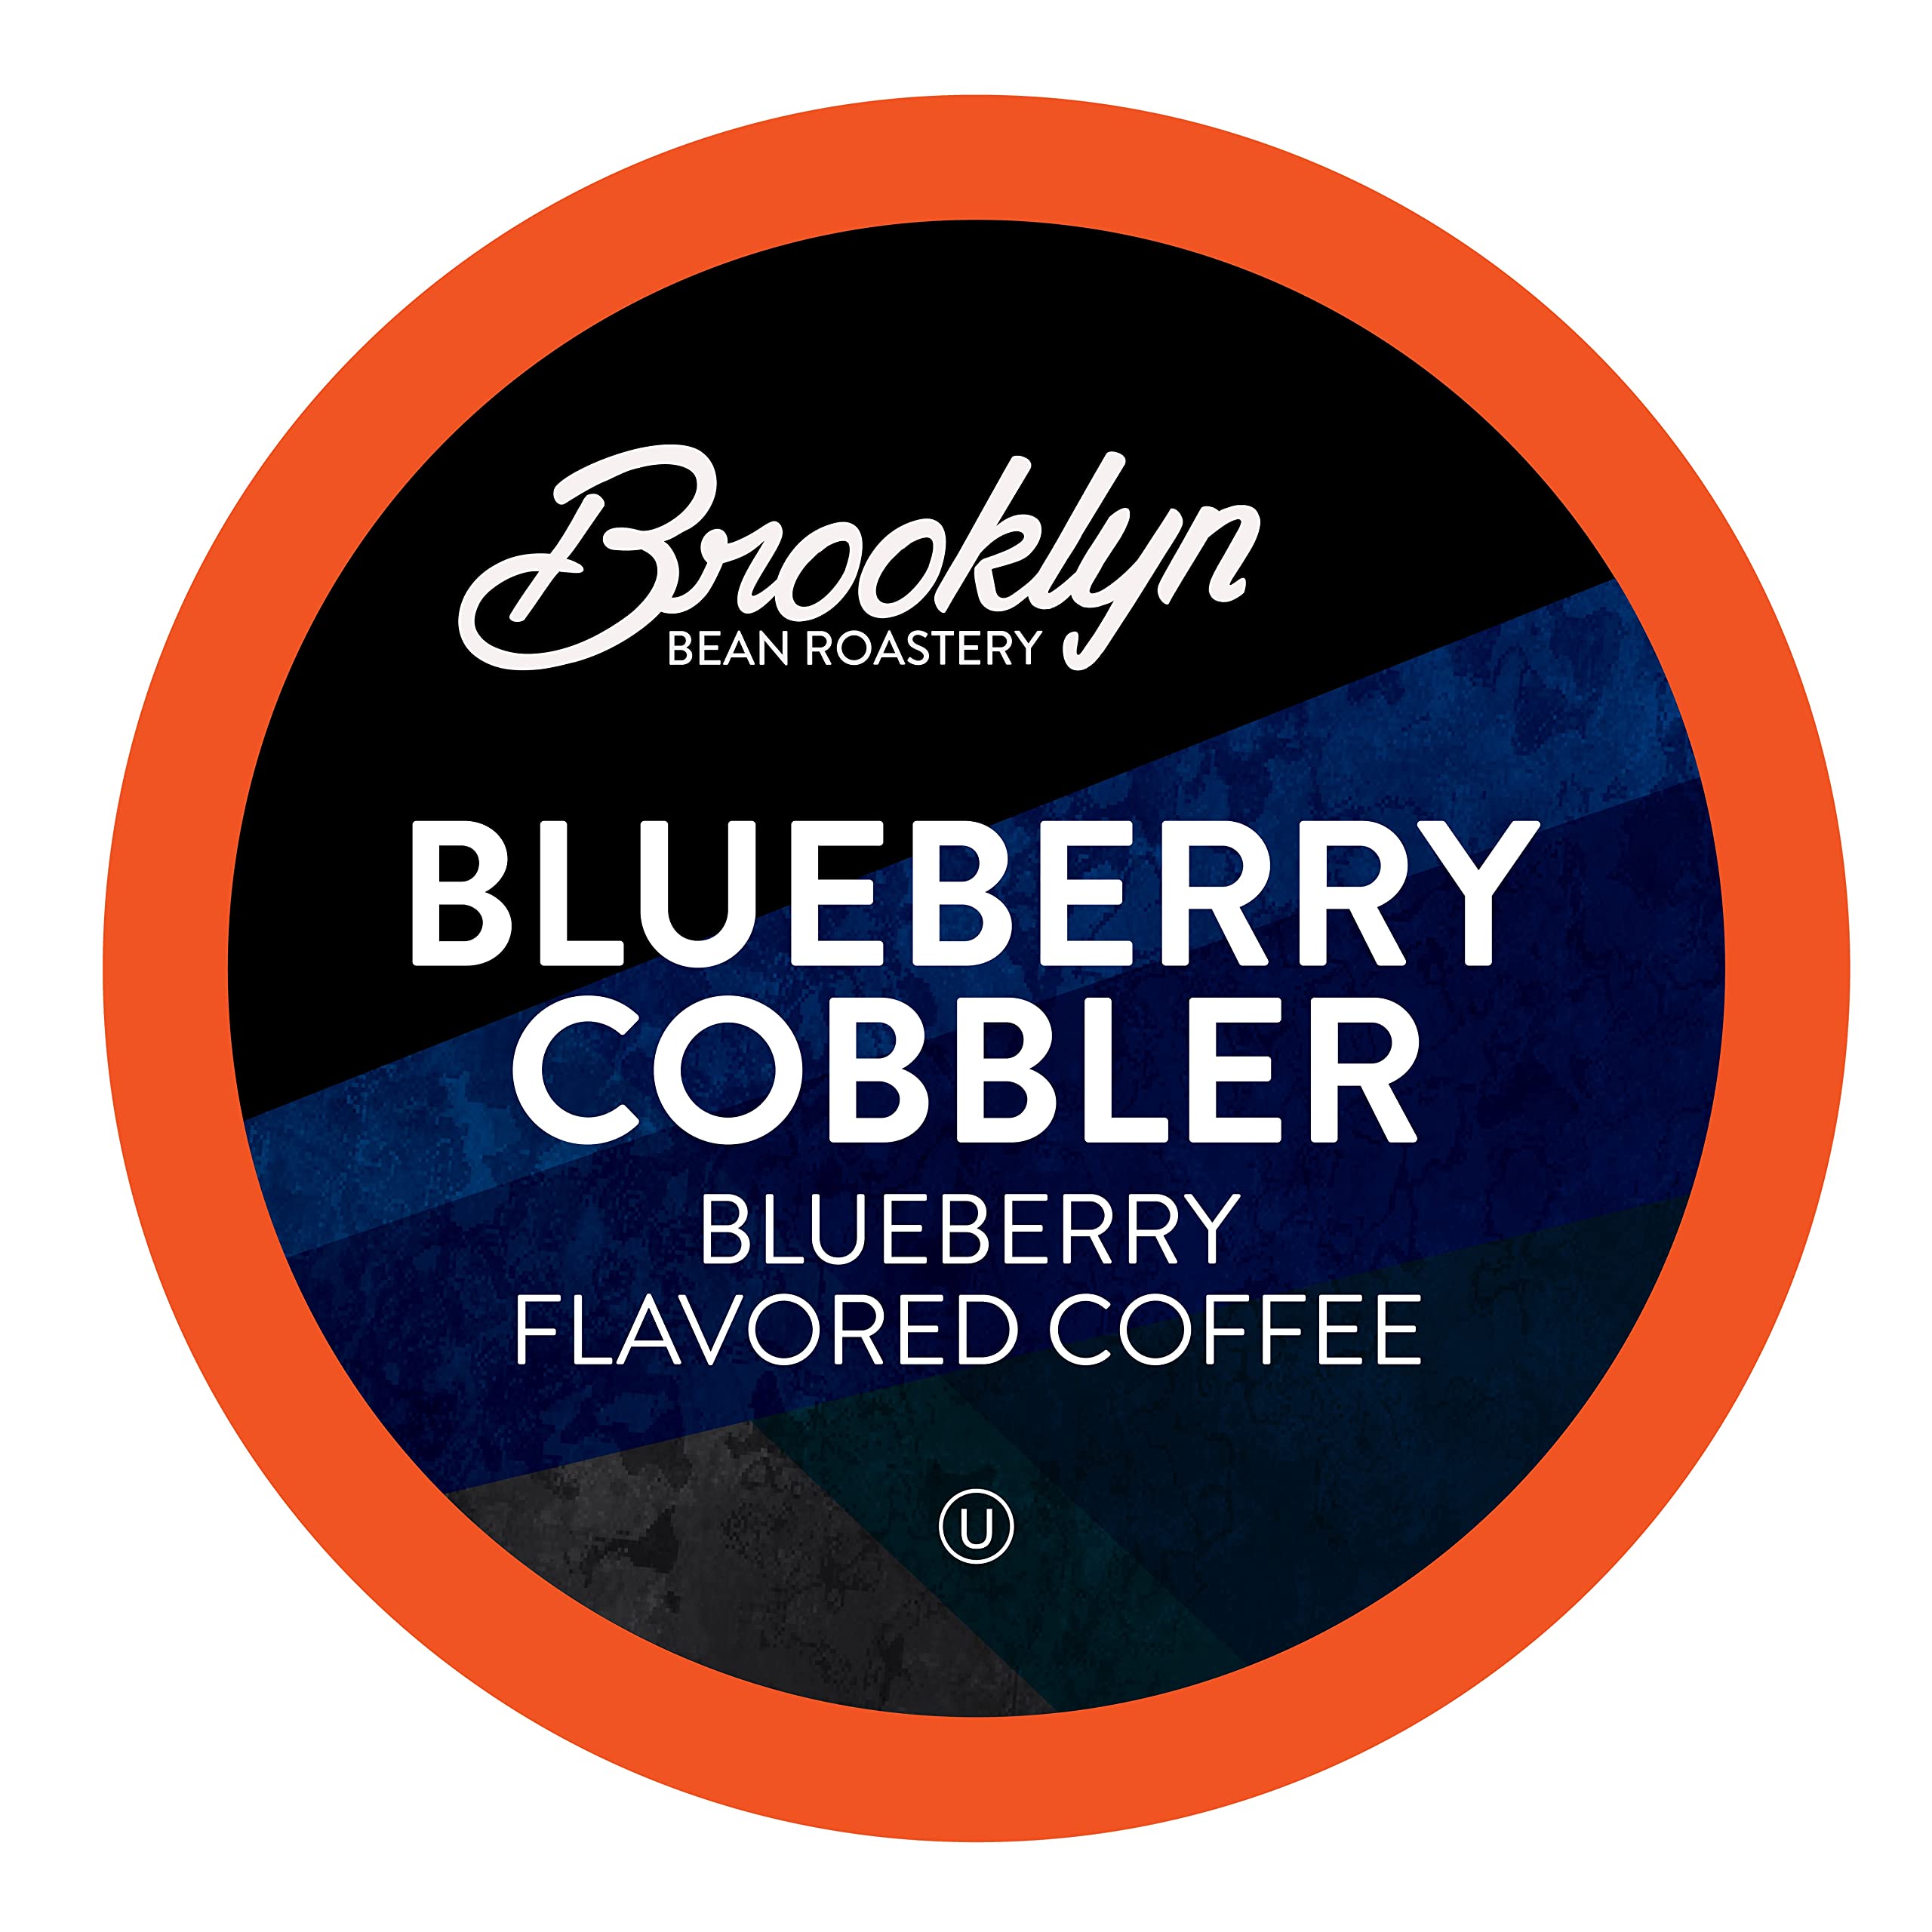 Brooklyn Beans Blueberry Cobbler Coffee Pods Flavored Gourmet Pack, Compatible with 2.0 Keurig K Cup Brewers, 40 Count